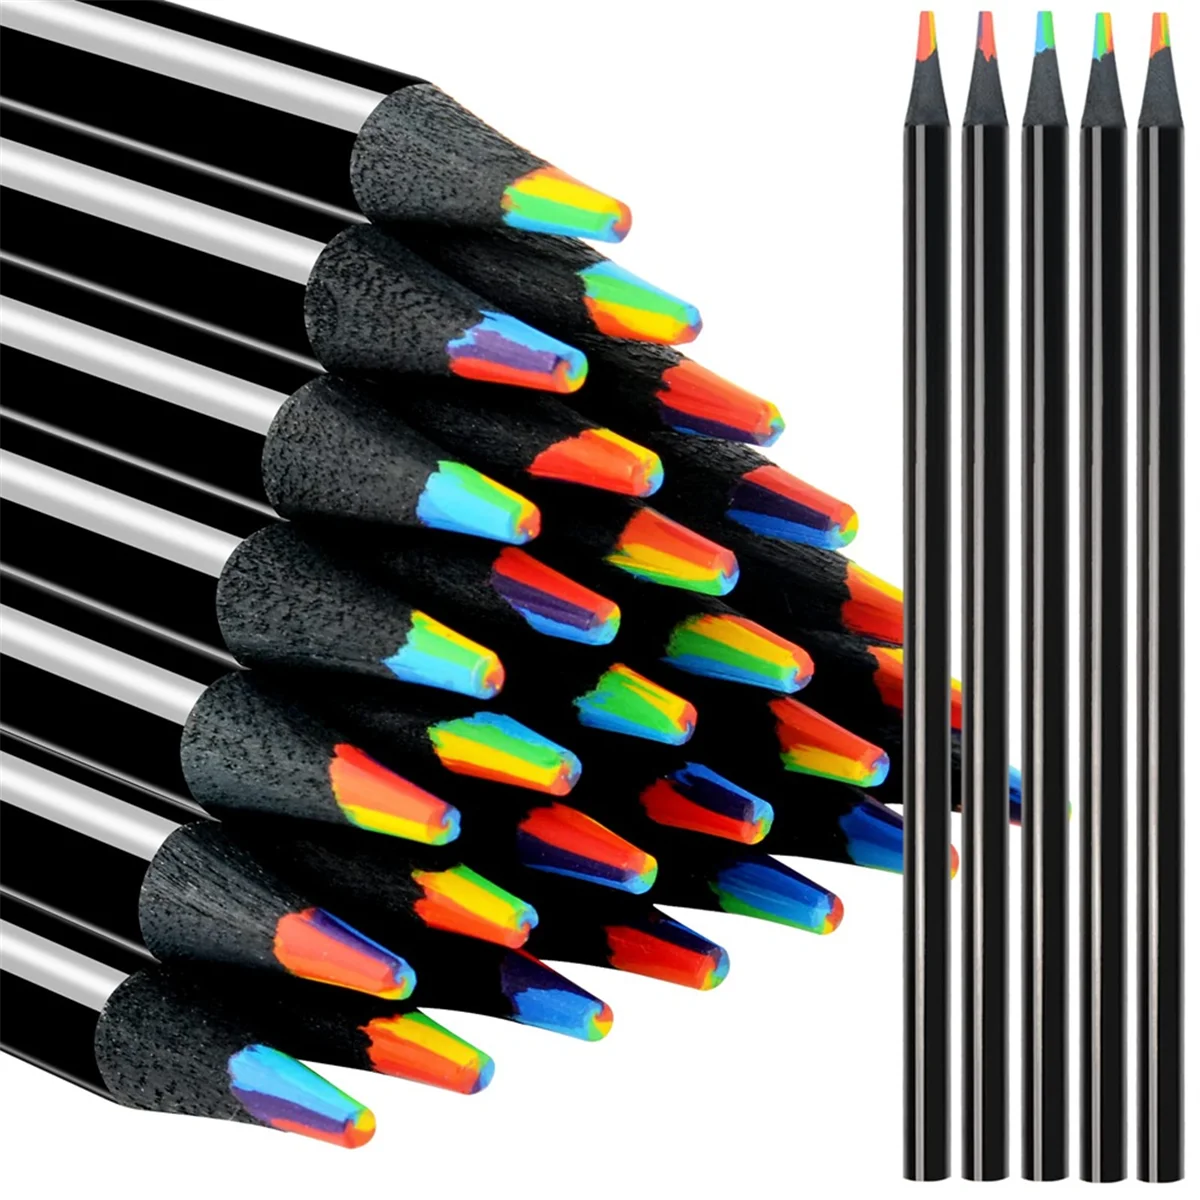 

7-In-1 Wooden Rainbow Pencils, Multicolored Pencils Assorted Colors Art-Supplies for Drawing Coloring Sketching 36Pcs